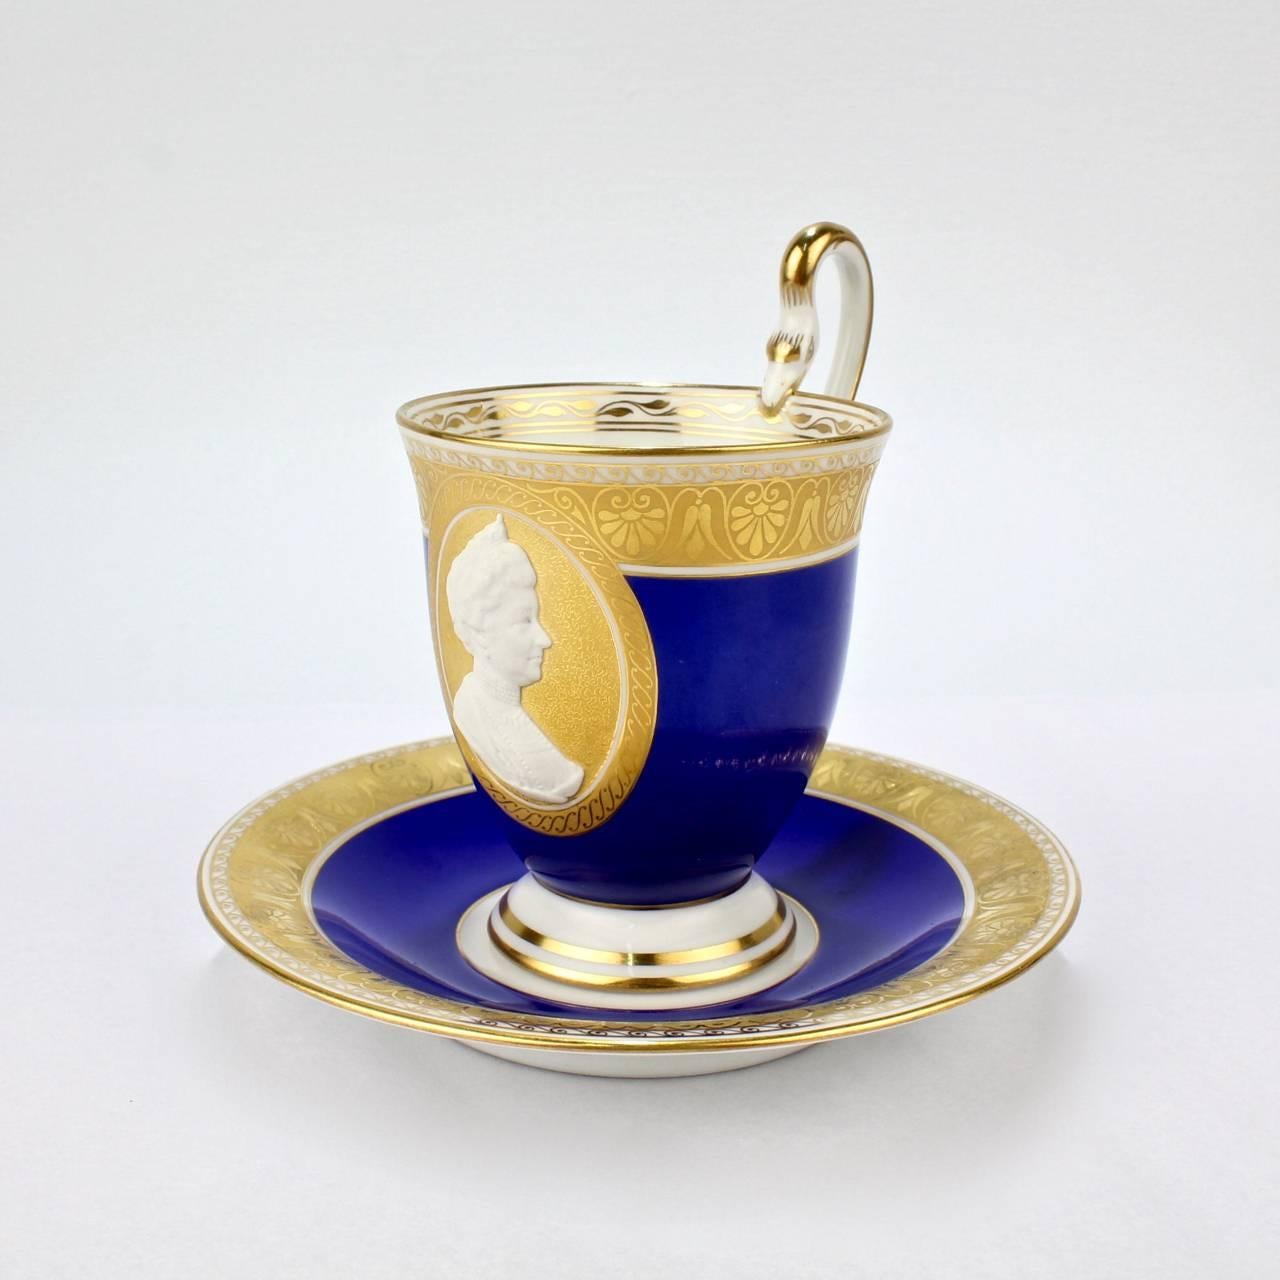 A wonderful and rare, antique KPM Royal Berlin cameo portrait cup and saucer.

The cameo relief bisque portrait depicting Empress Augusta Victoria is centered in a gold cartouche surrounded by a lapis blue ground.

Both cup and saucer have a